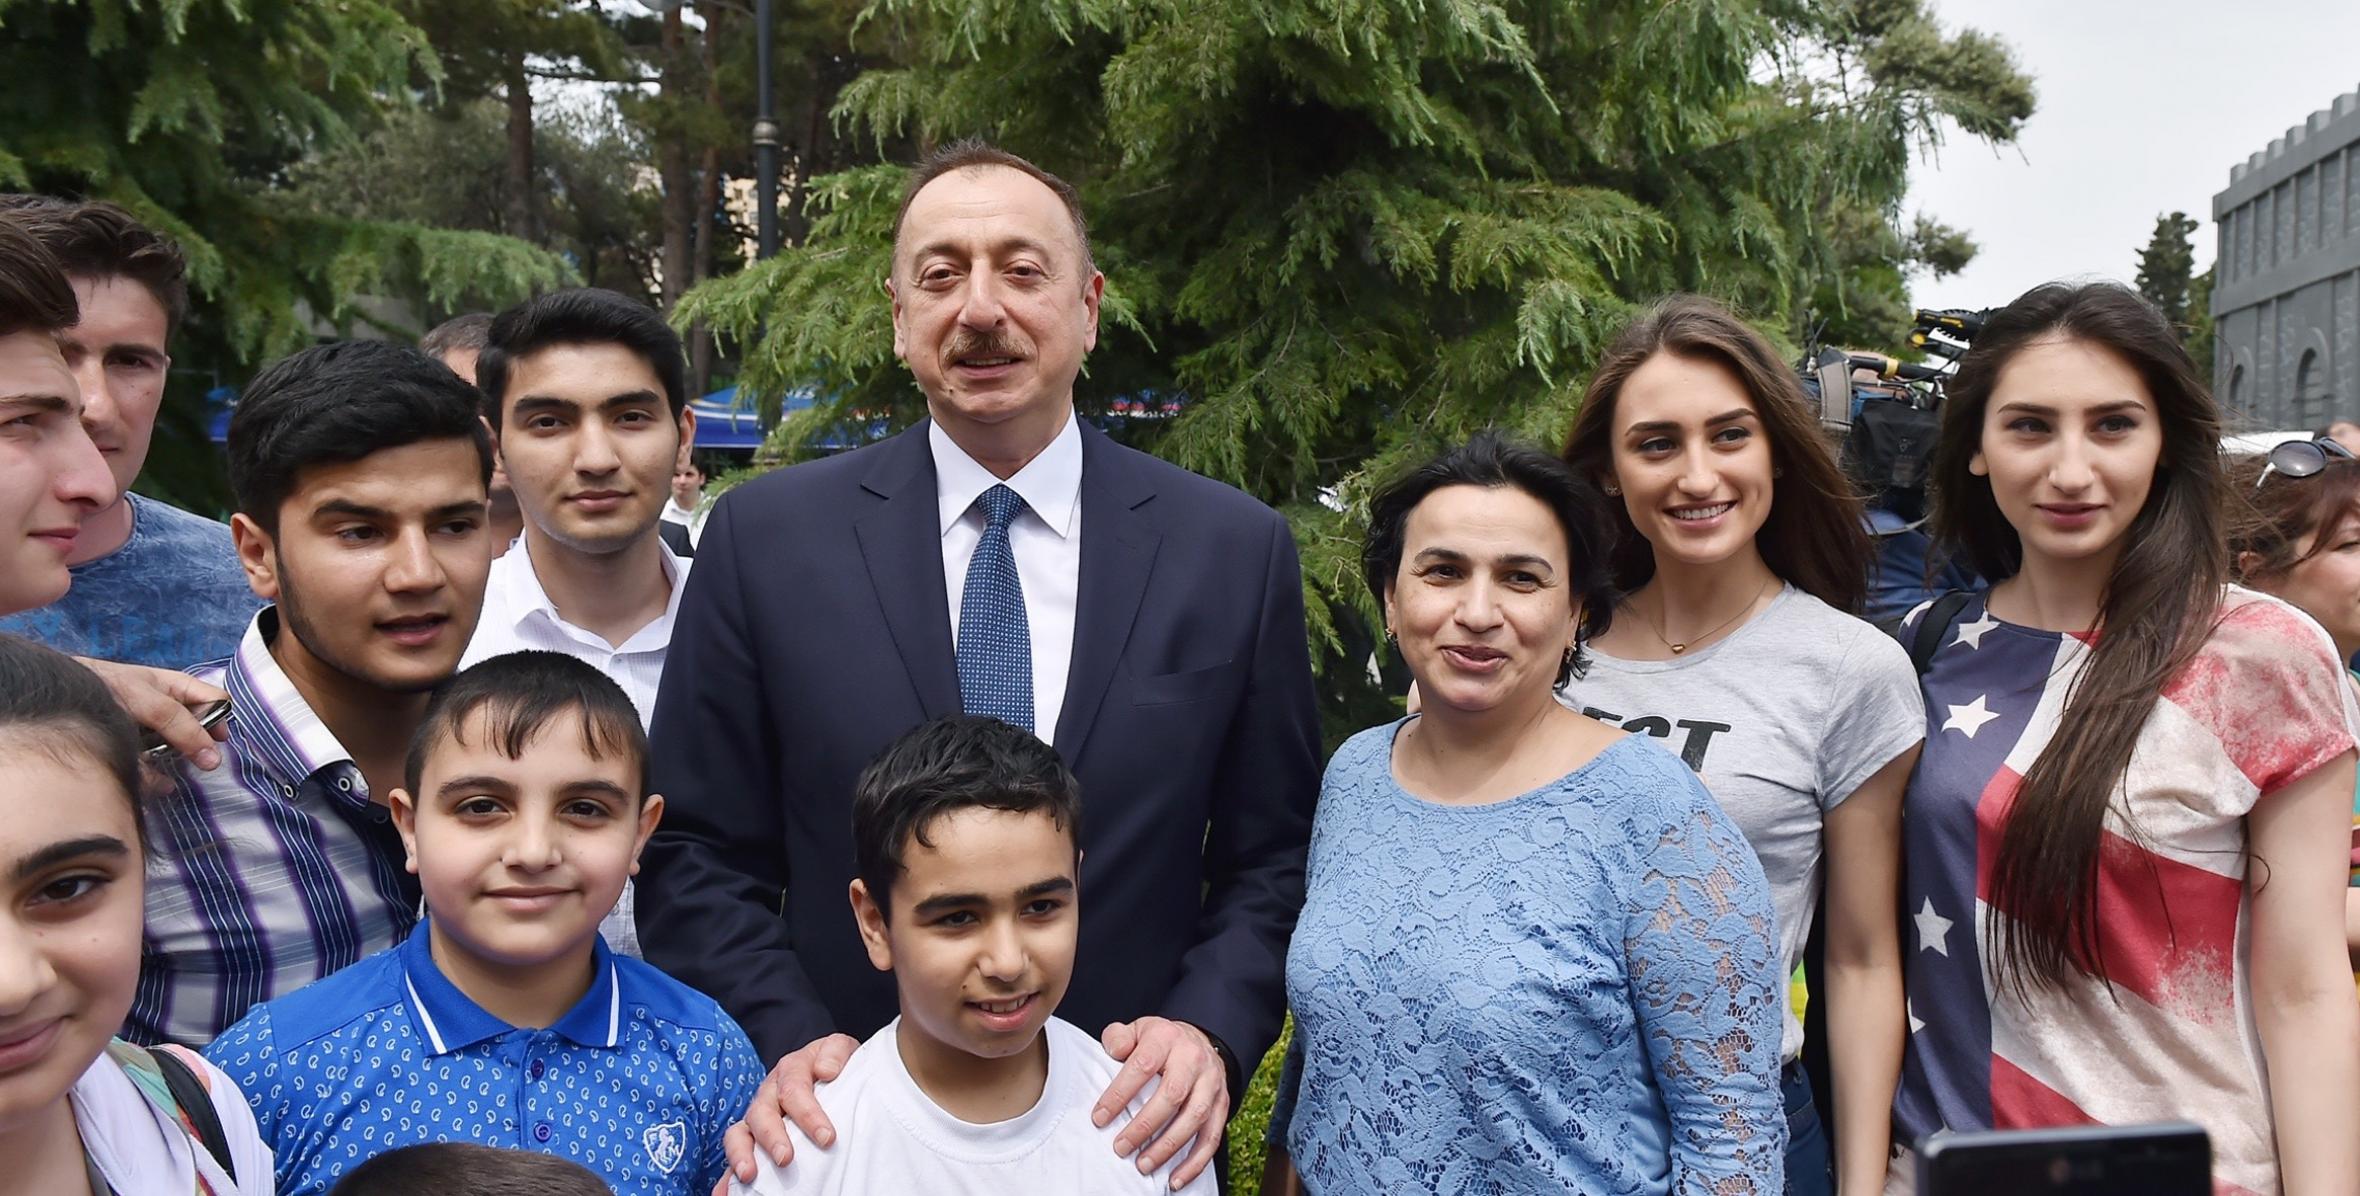 Ilham Aliyev attended the opening of the Baku White City boulevard